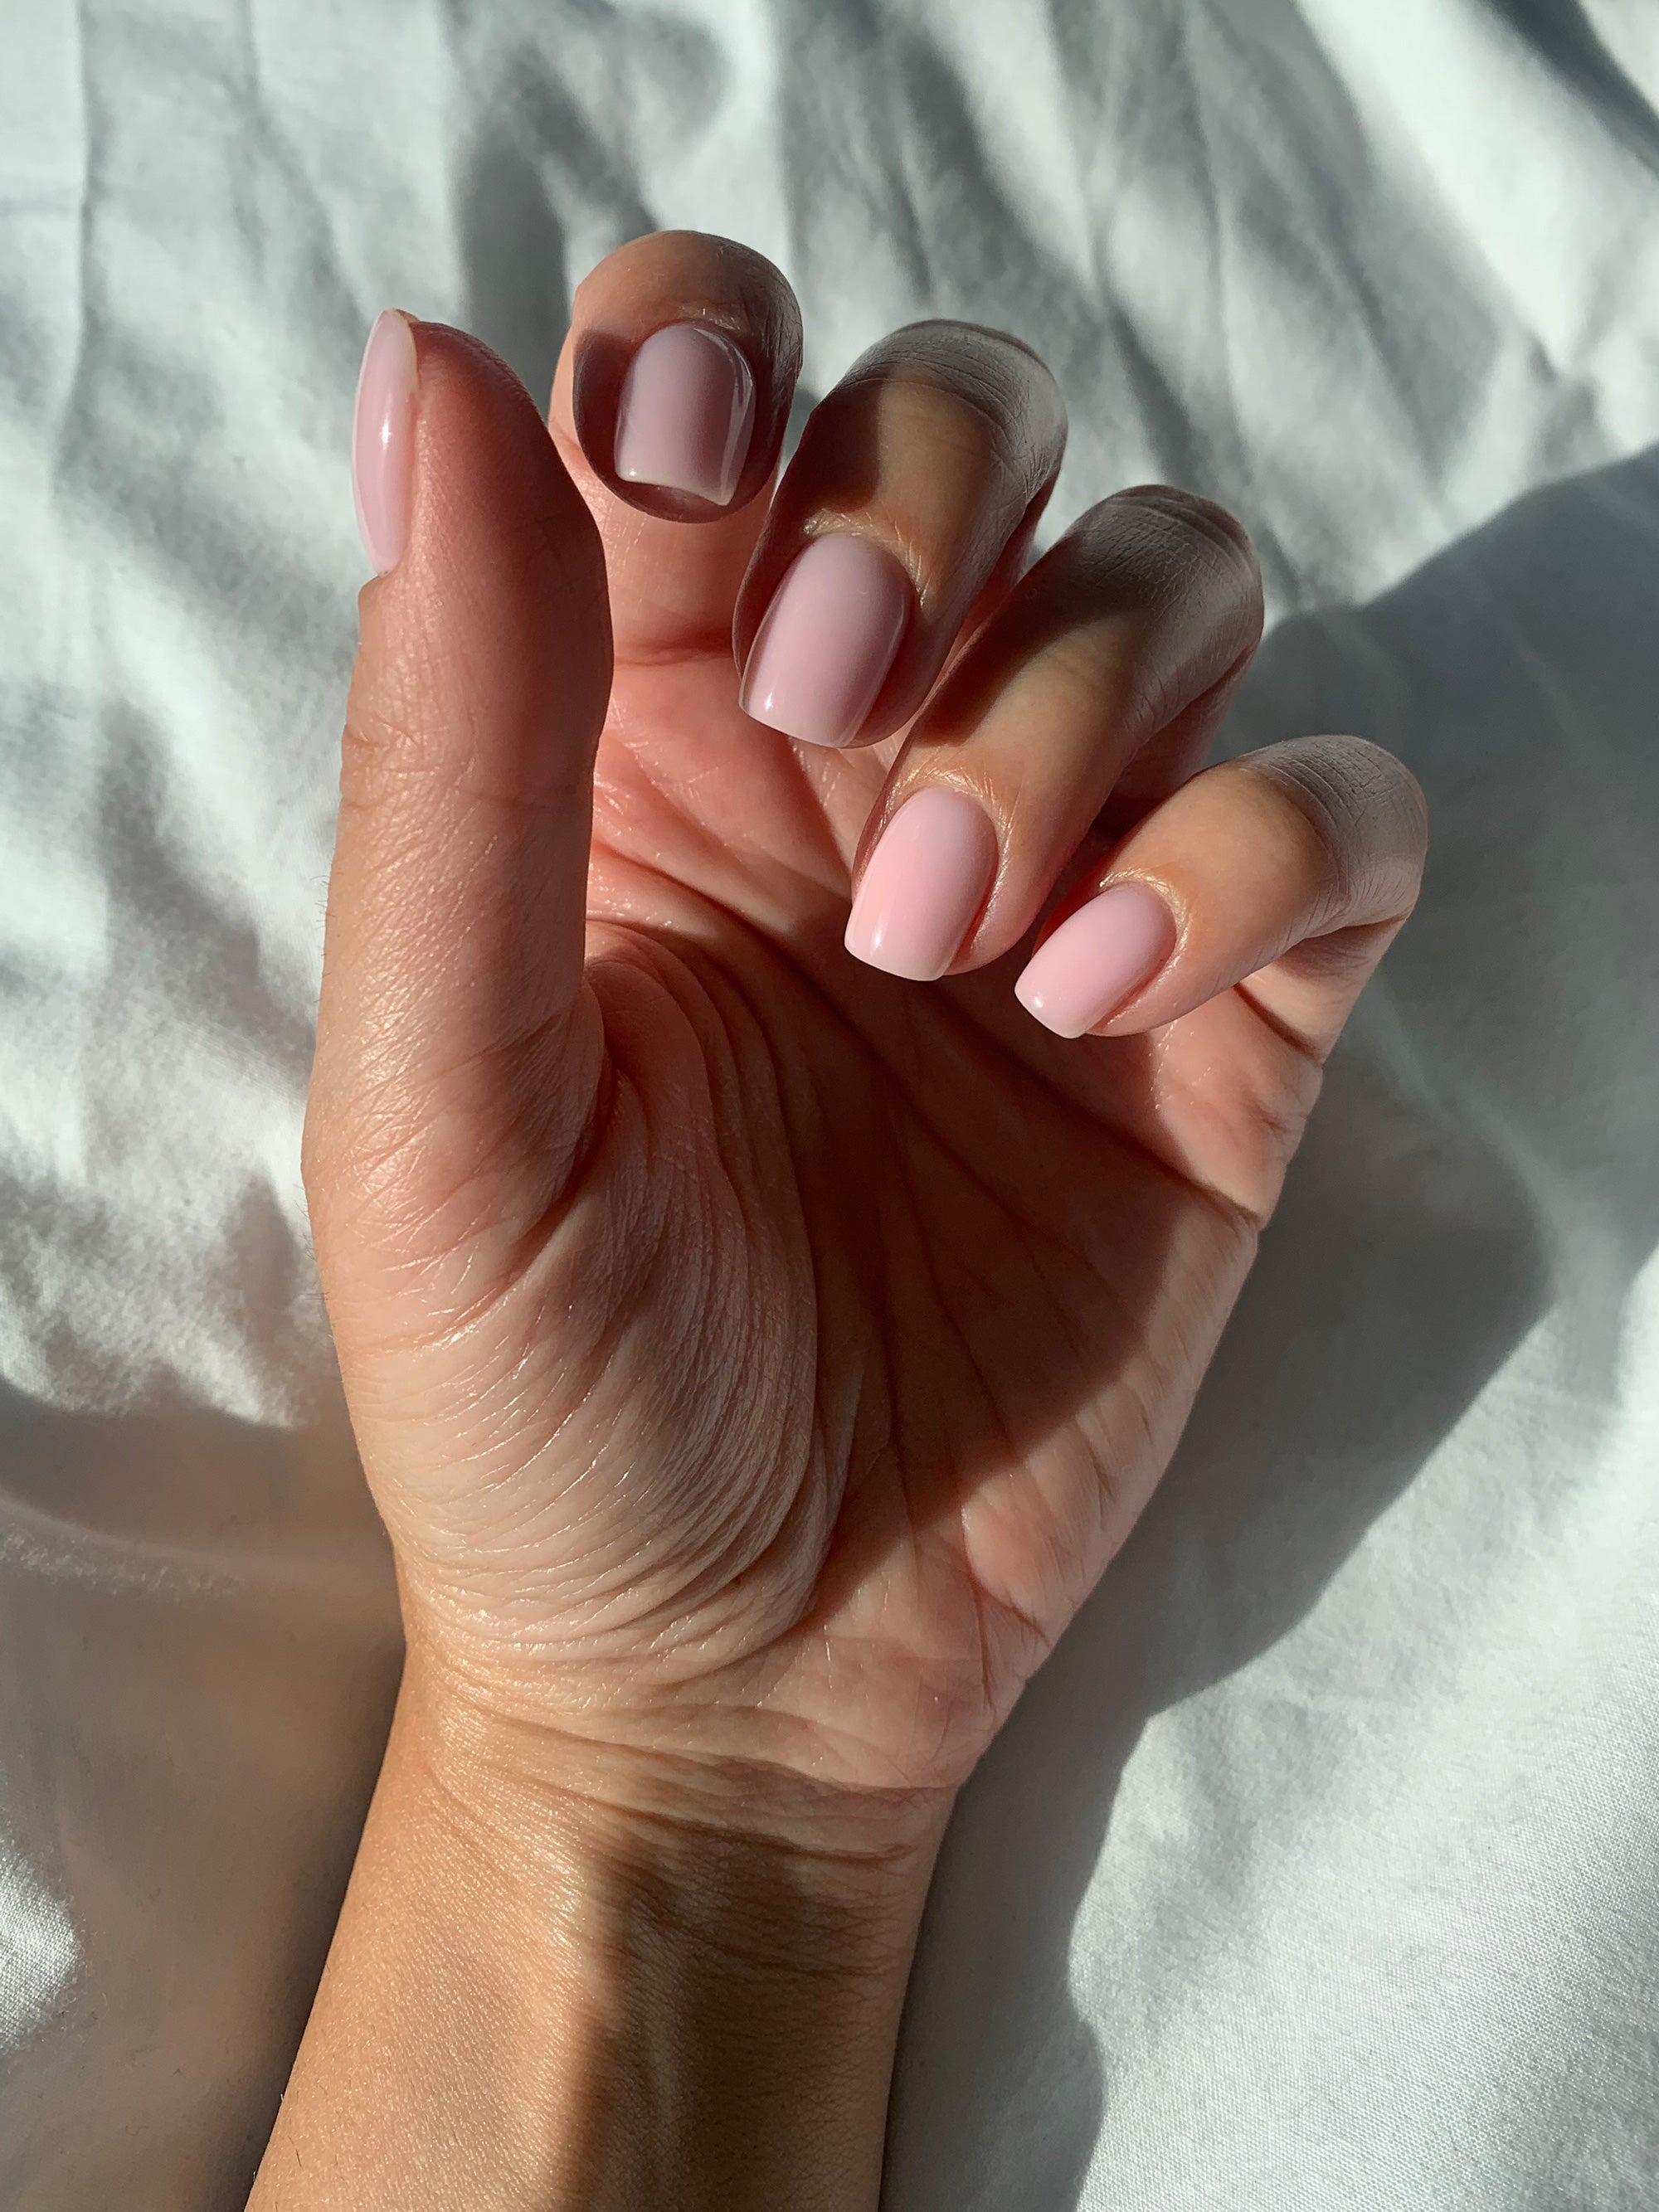 Spa Manicure Treatments | SpaSeekers Guides